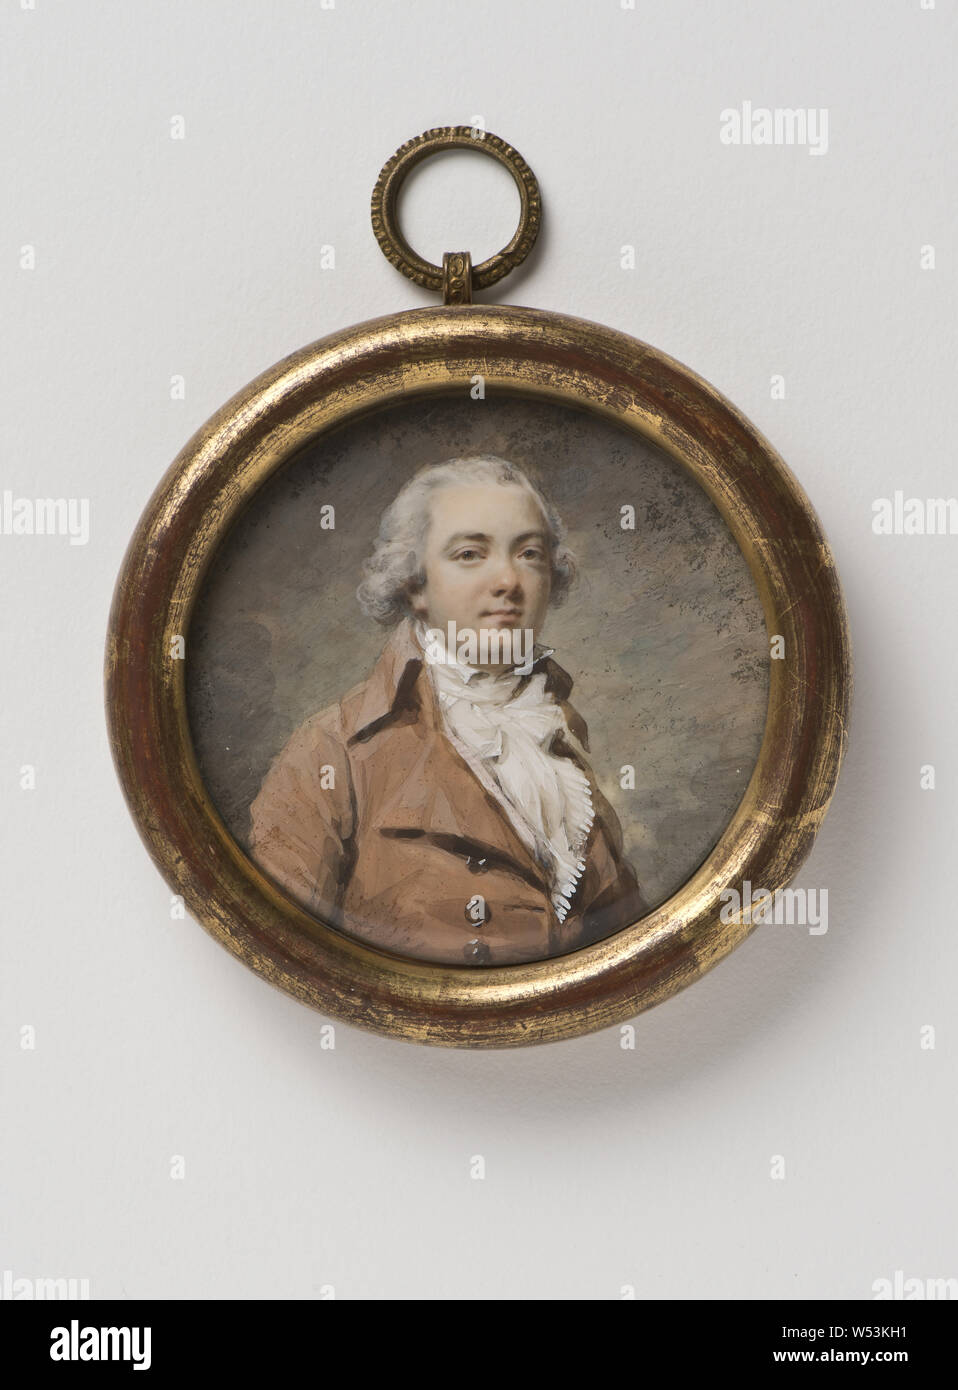 Jacques-Antoine-Marie Lemoine, Self-portrait, painting, before 1824, Watercolor on ivory, gilt wooden frame, frame in gilded wood, Height, 5.6 cm (2.2 inch), Inscription, Jacques-Antoine Marie Lemoine son propre portrait, lapp verso, Collection de Paul Huet son parent, patch verse, Signature, LM ., . 3 pinxit, graphite, to the right in the portrait Stock Photo